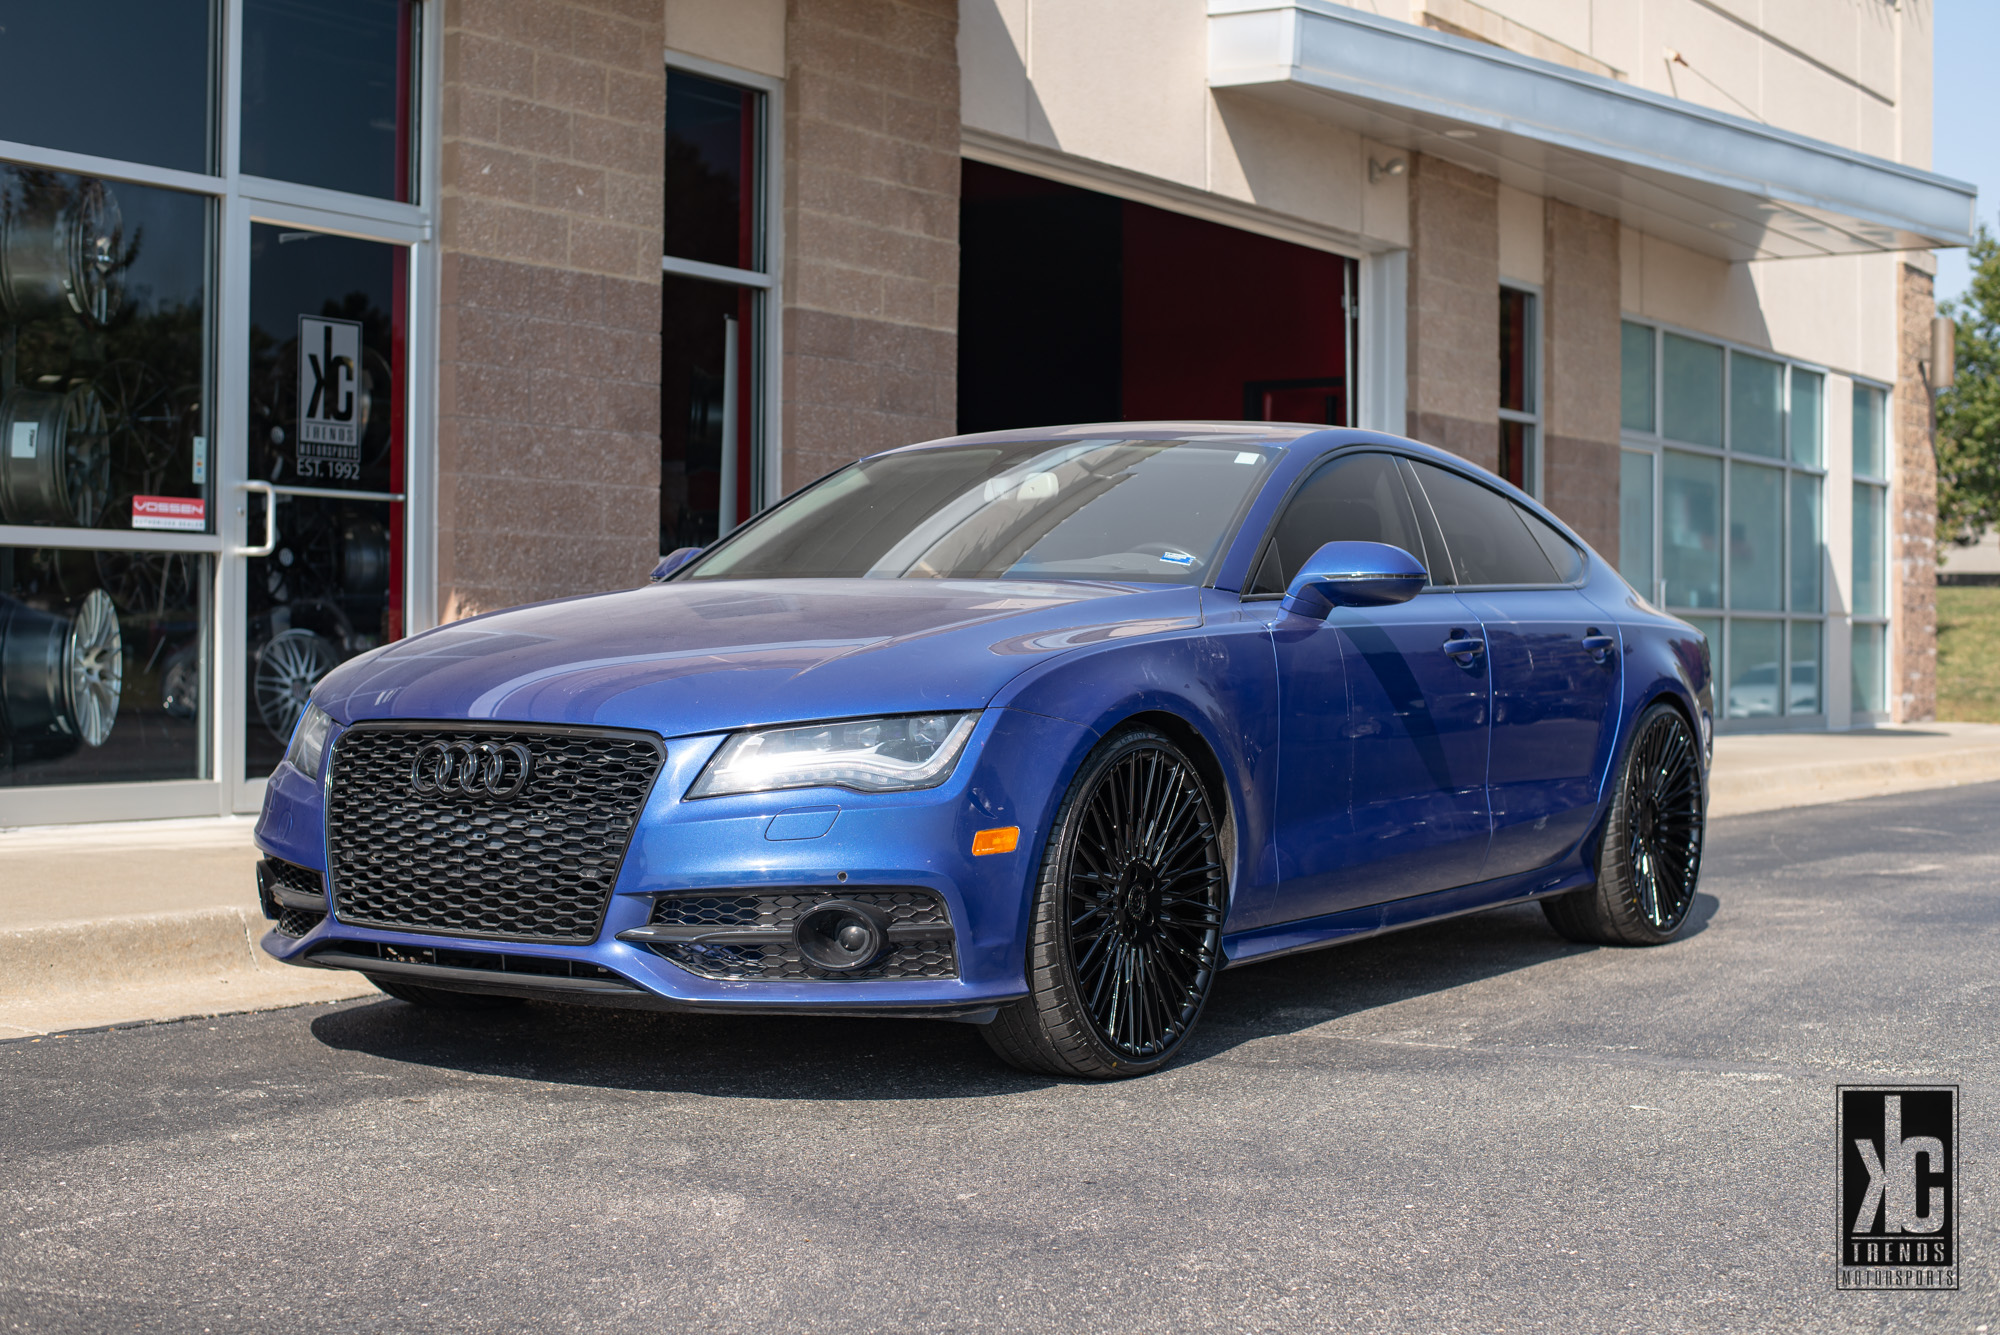  Audi A7 with 